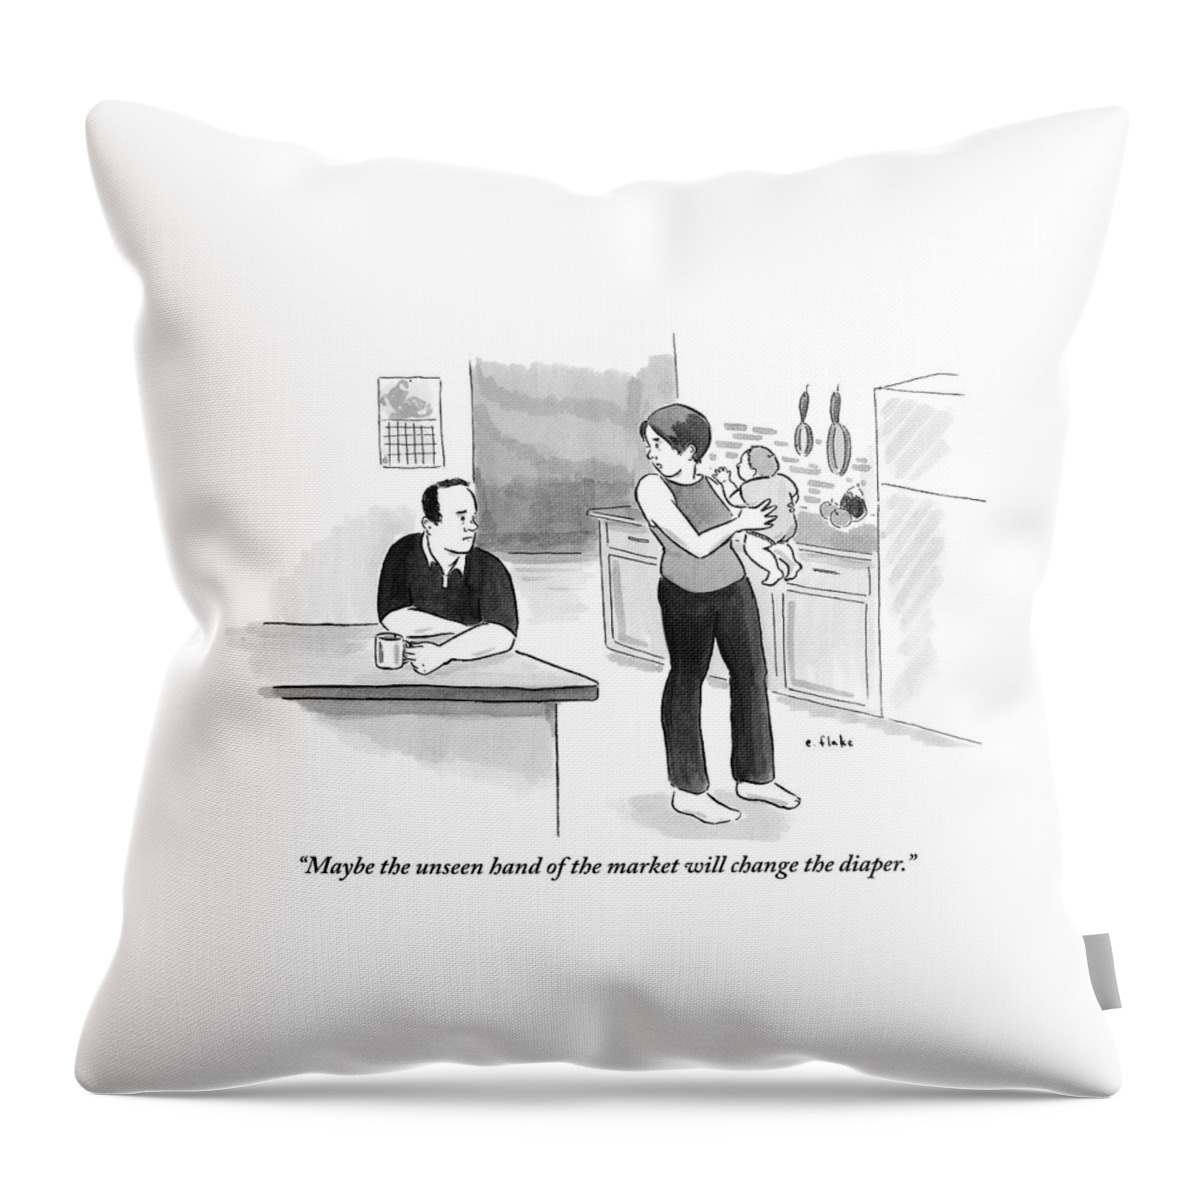 Man And Wife Are In Their Kitchen. Wife Holds Throw Pillow